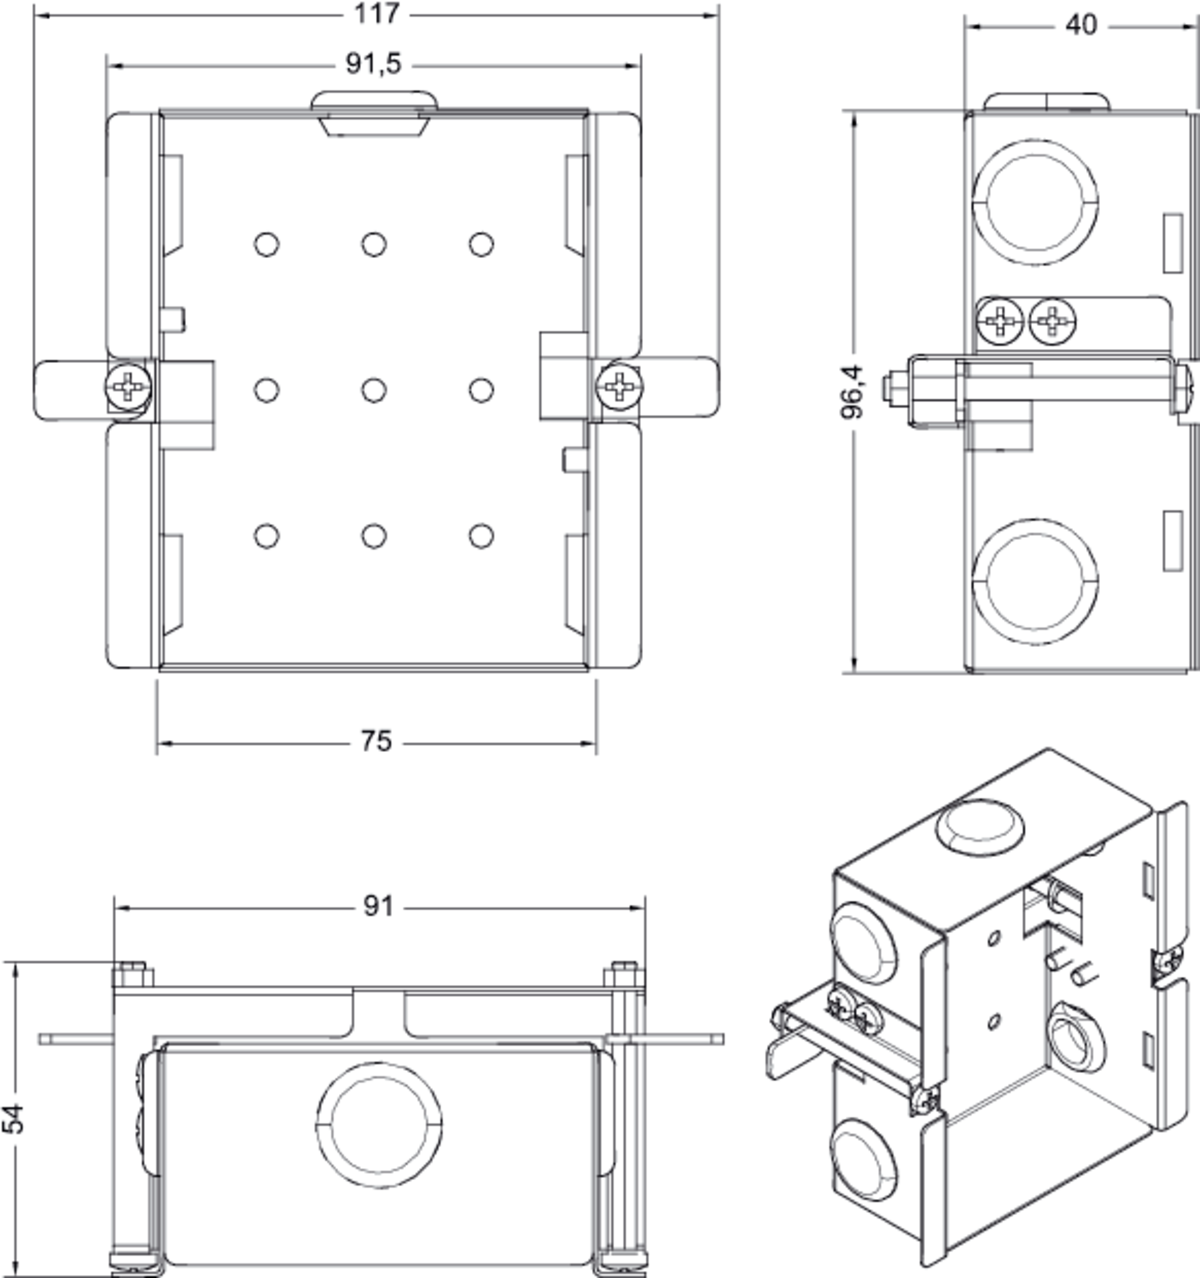 Images Dimensions - SAVE wall box - Systemair